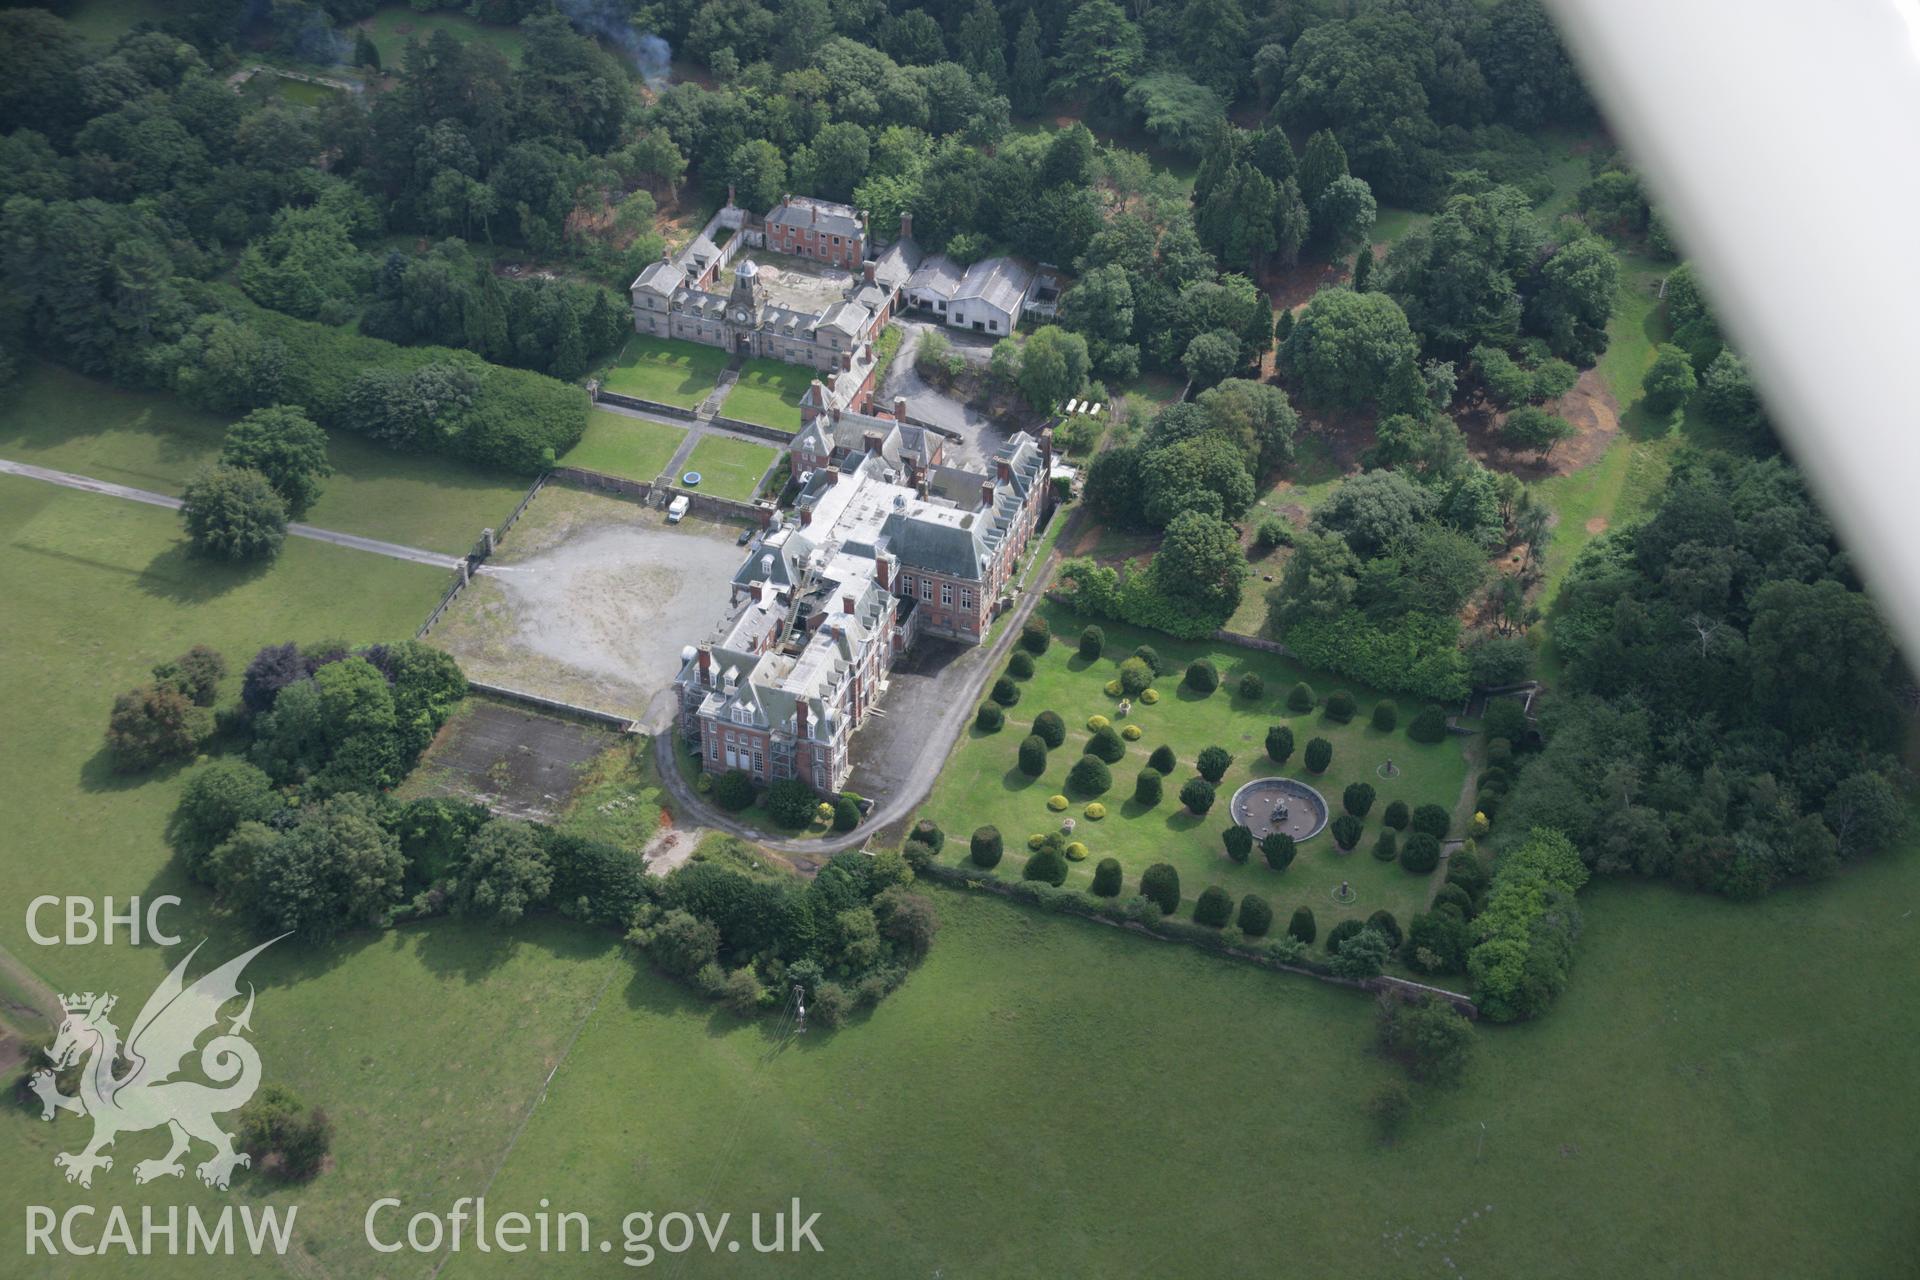 RCAHMW colour oblique aerial photograph of Kinmel Hall and Park (Clarendon School), Bodelwyddan. Taken on 14 August 2006 by Toby Driver.